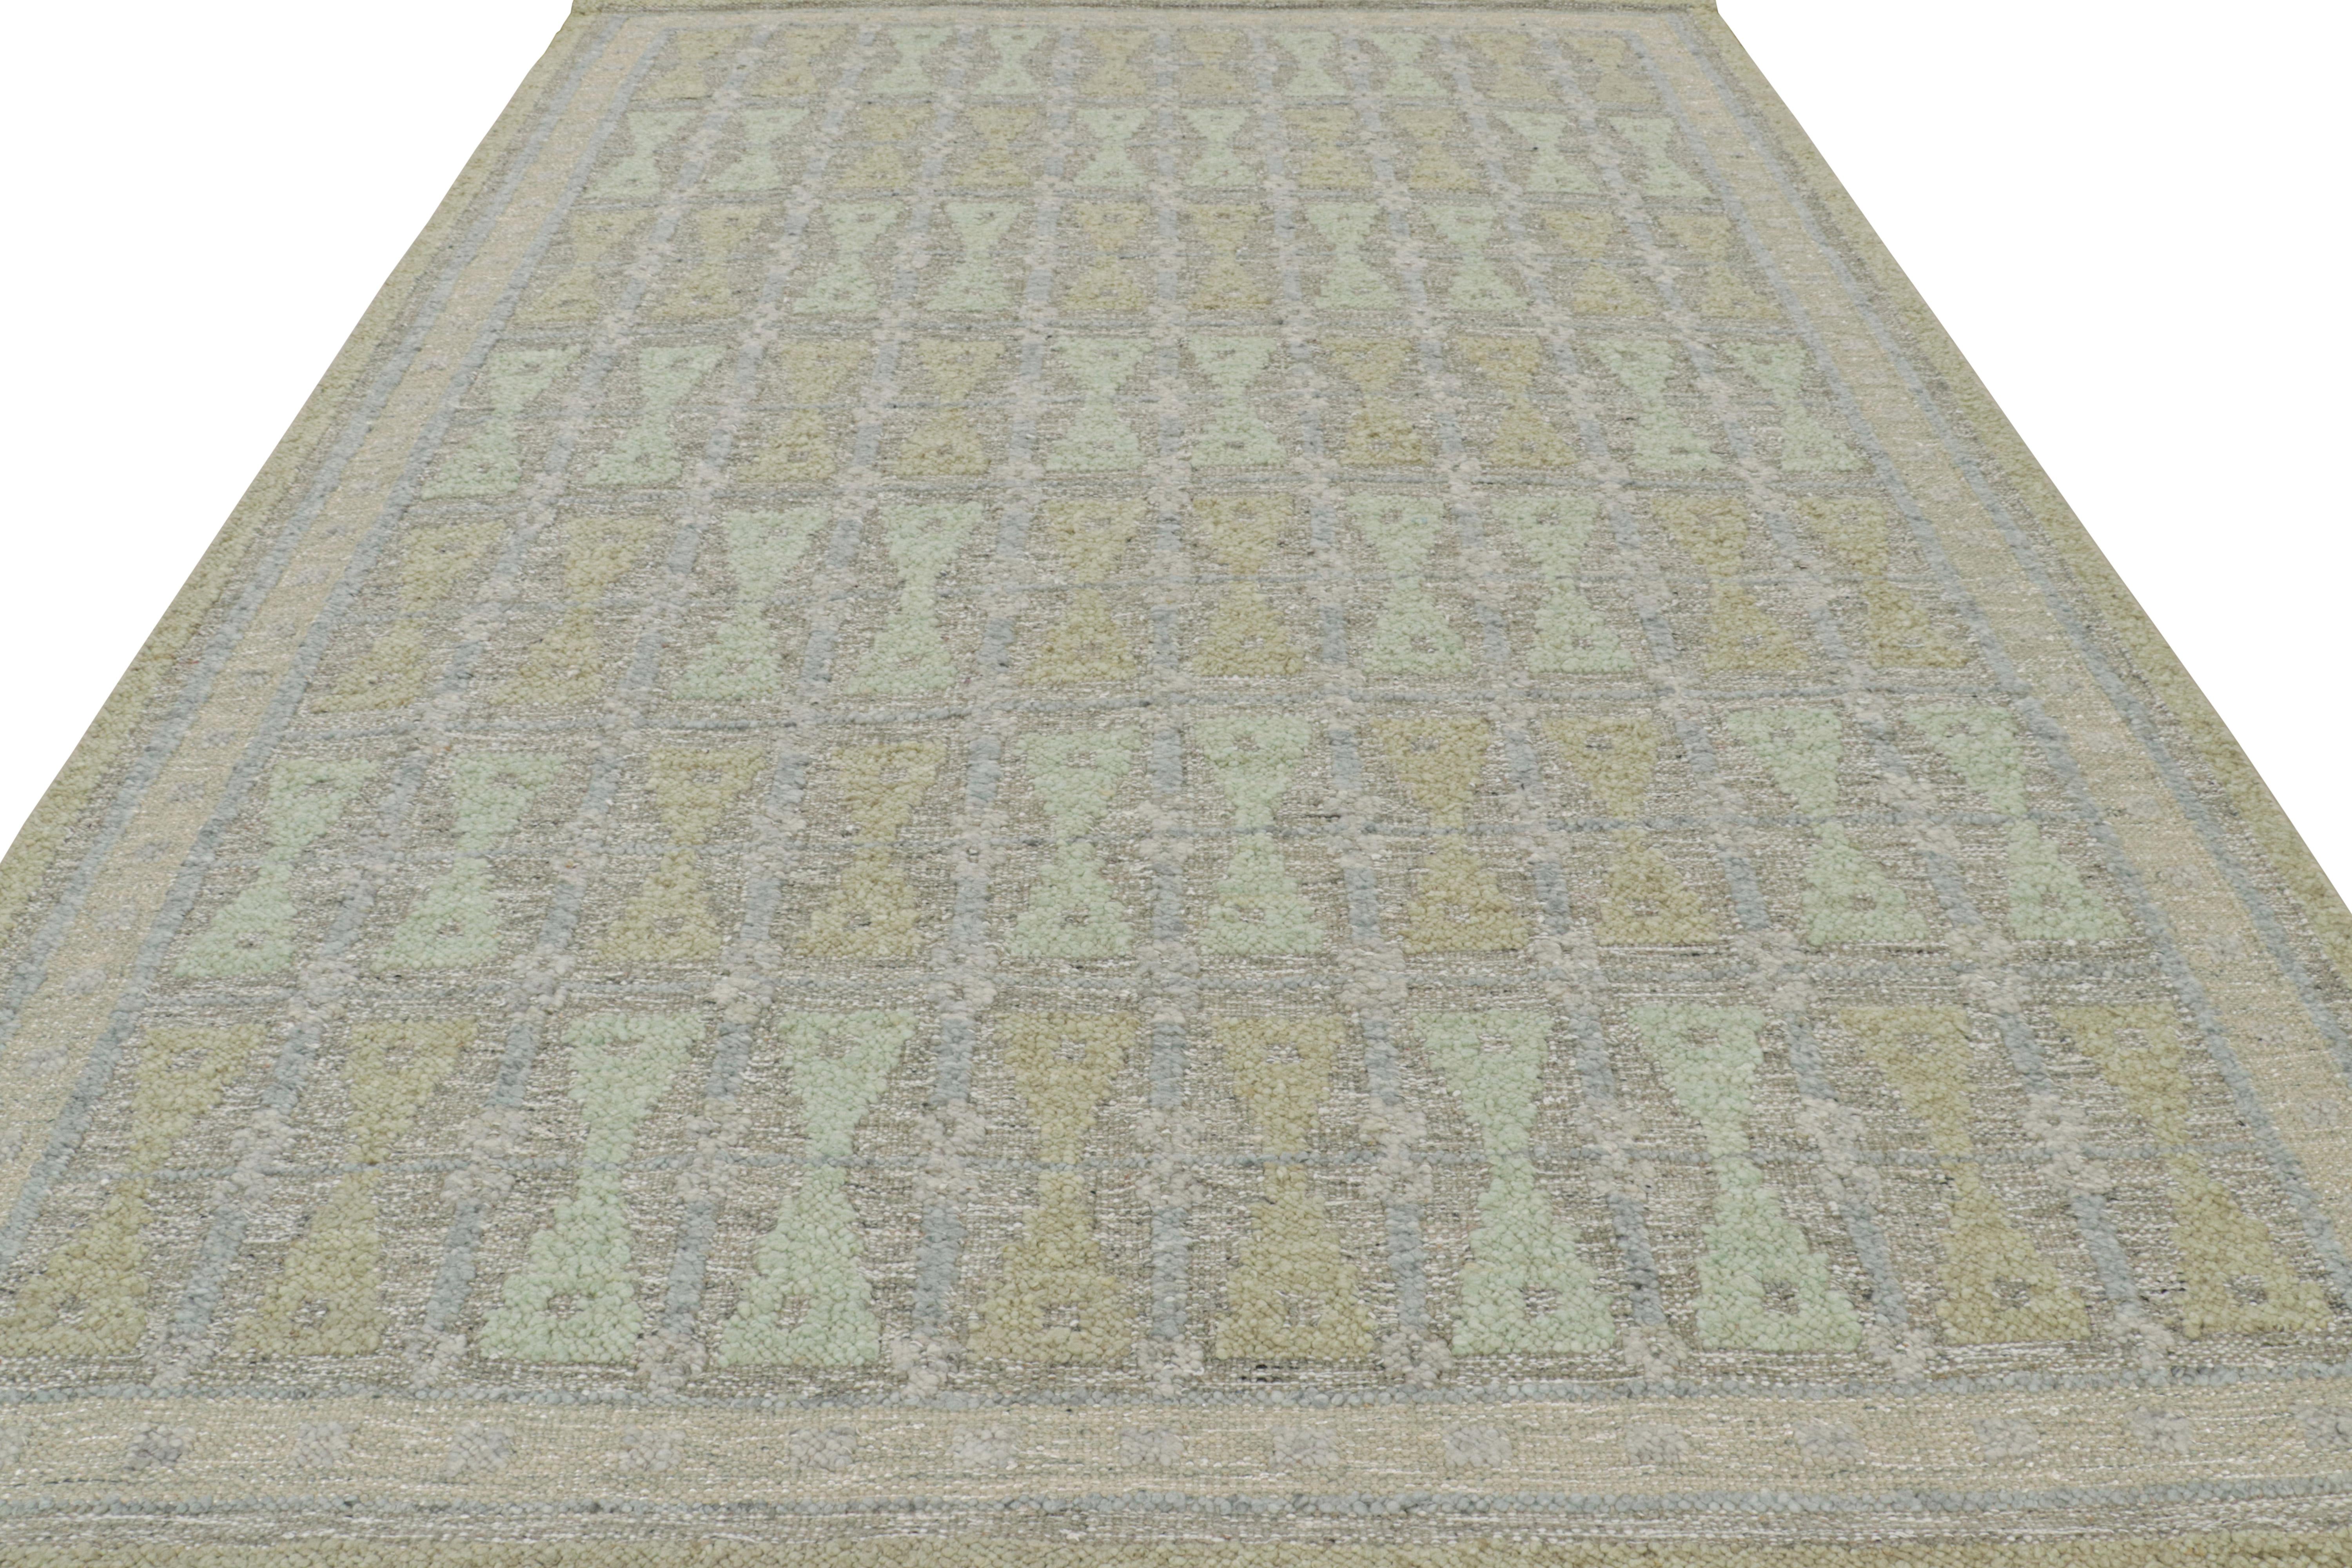 Hand-Woven Rug & Kilim’s Scandinavian Style Rug with Hourglass Patterns in Tones of Green For Sale